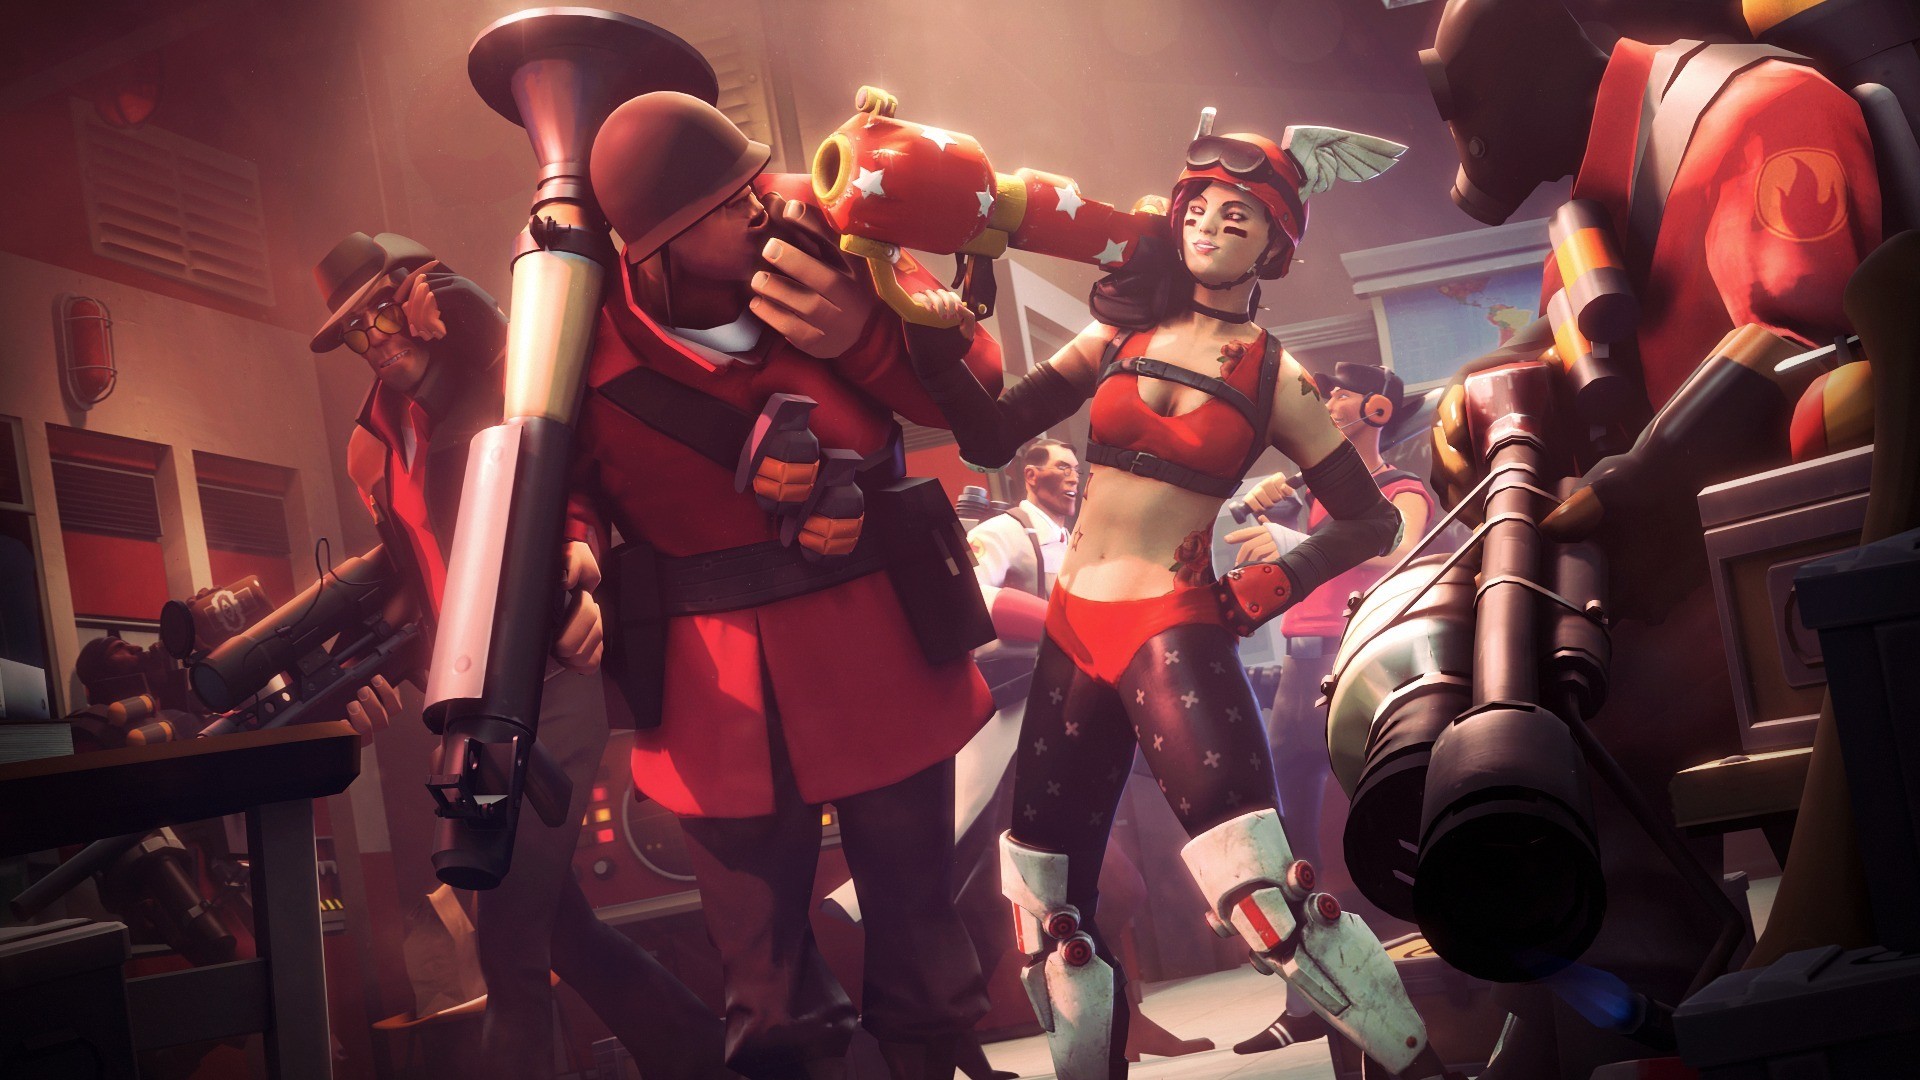 team fortress 2 wallpaper,fictional character,adventure game,animation,screenshot,games